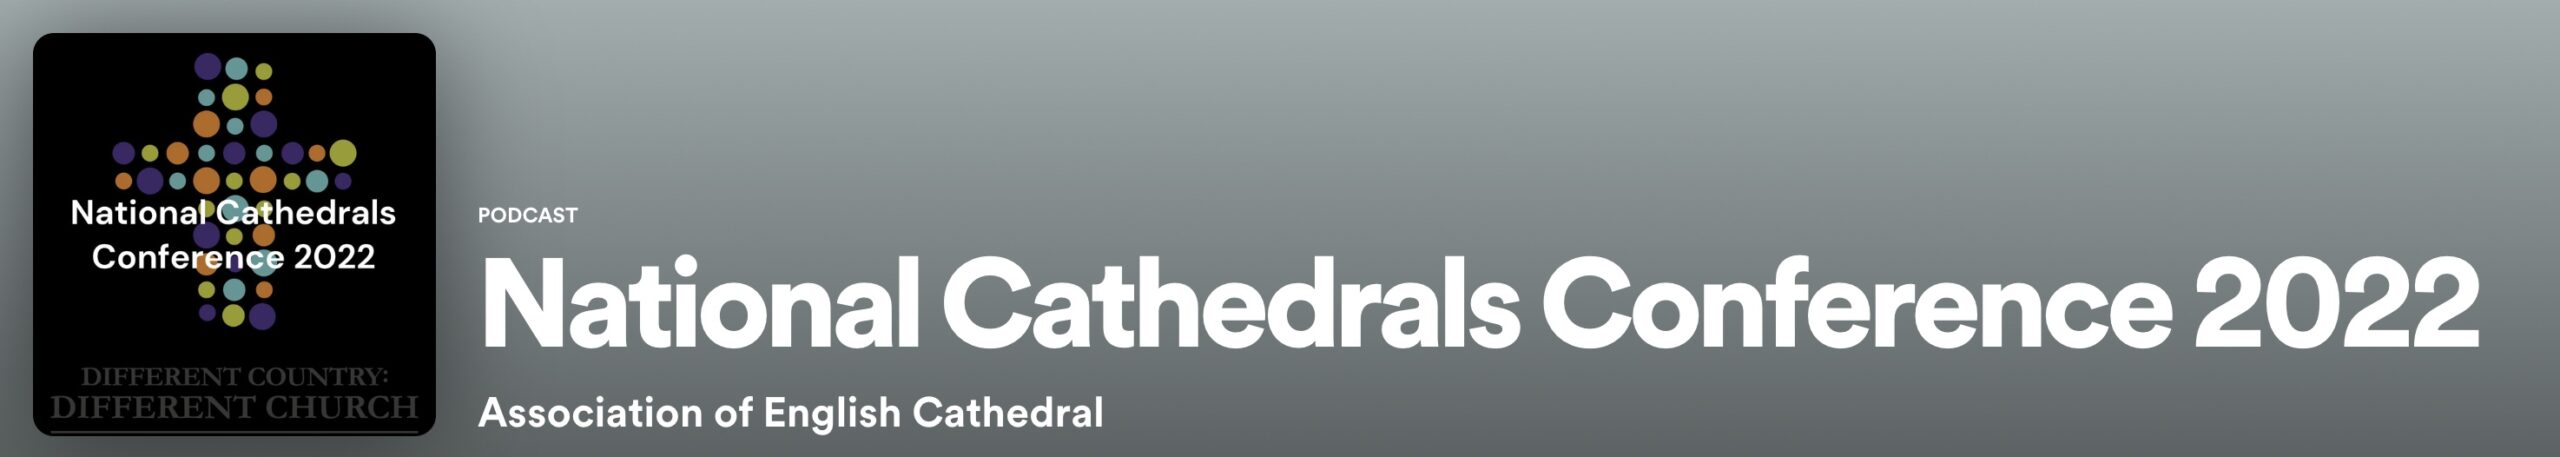 National Cathedrals Conference Podcast on Spotify